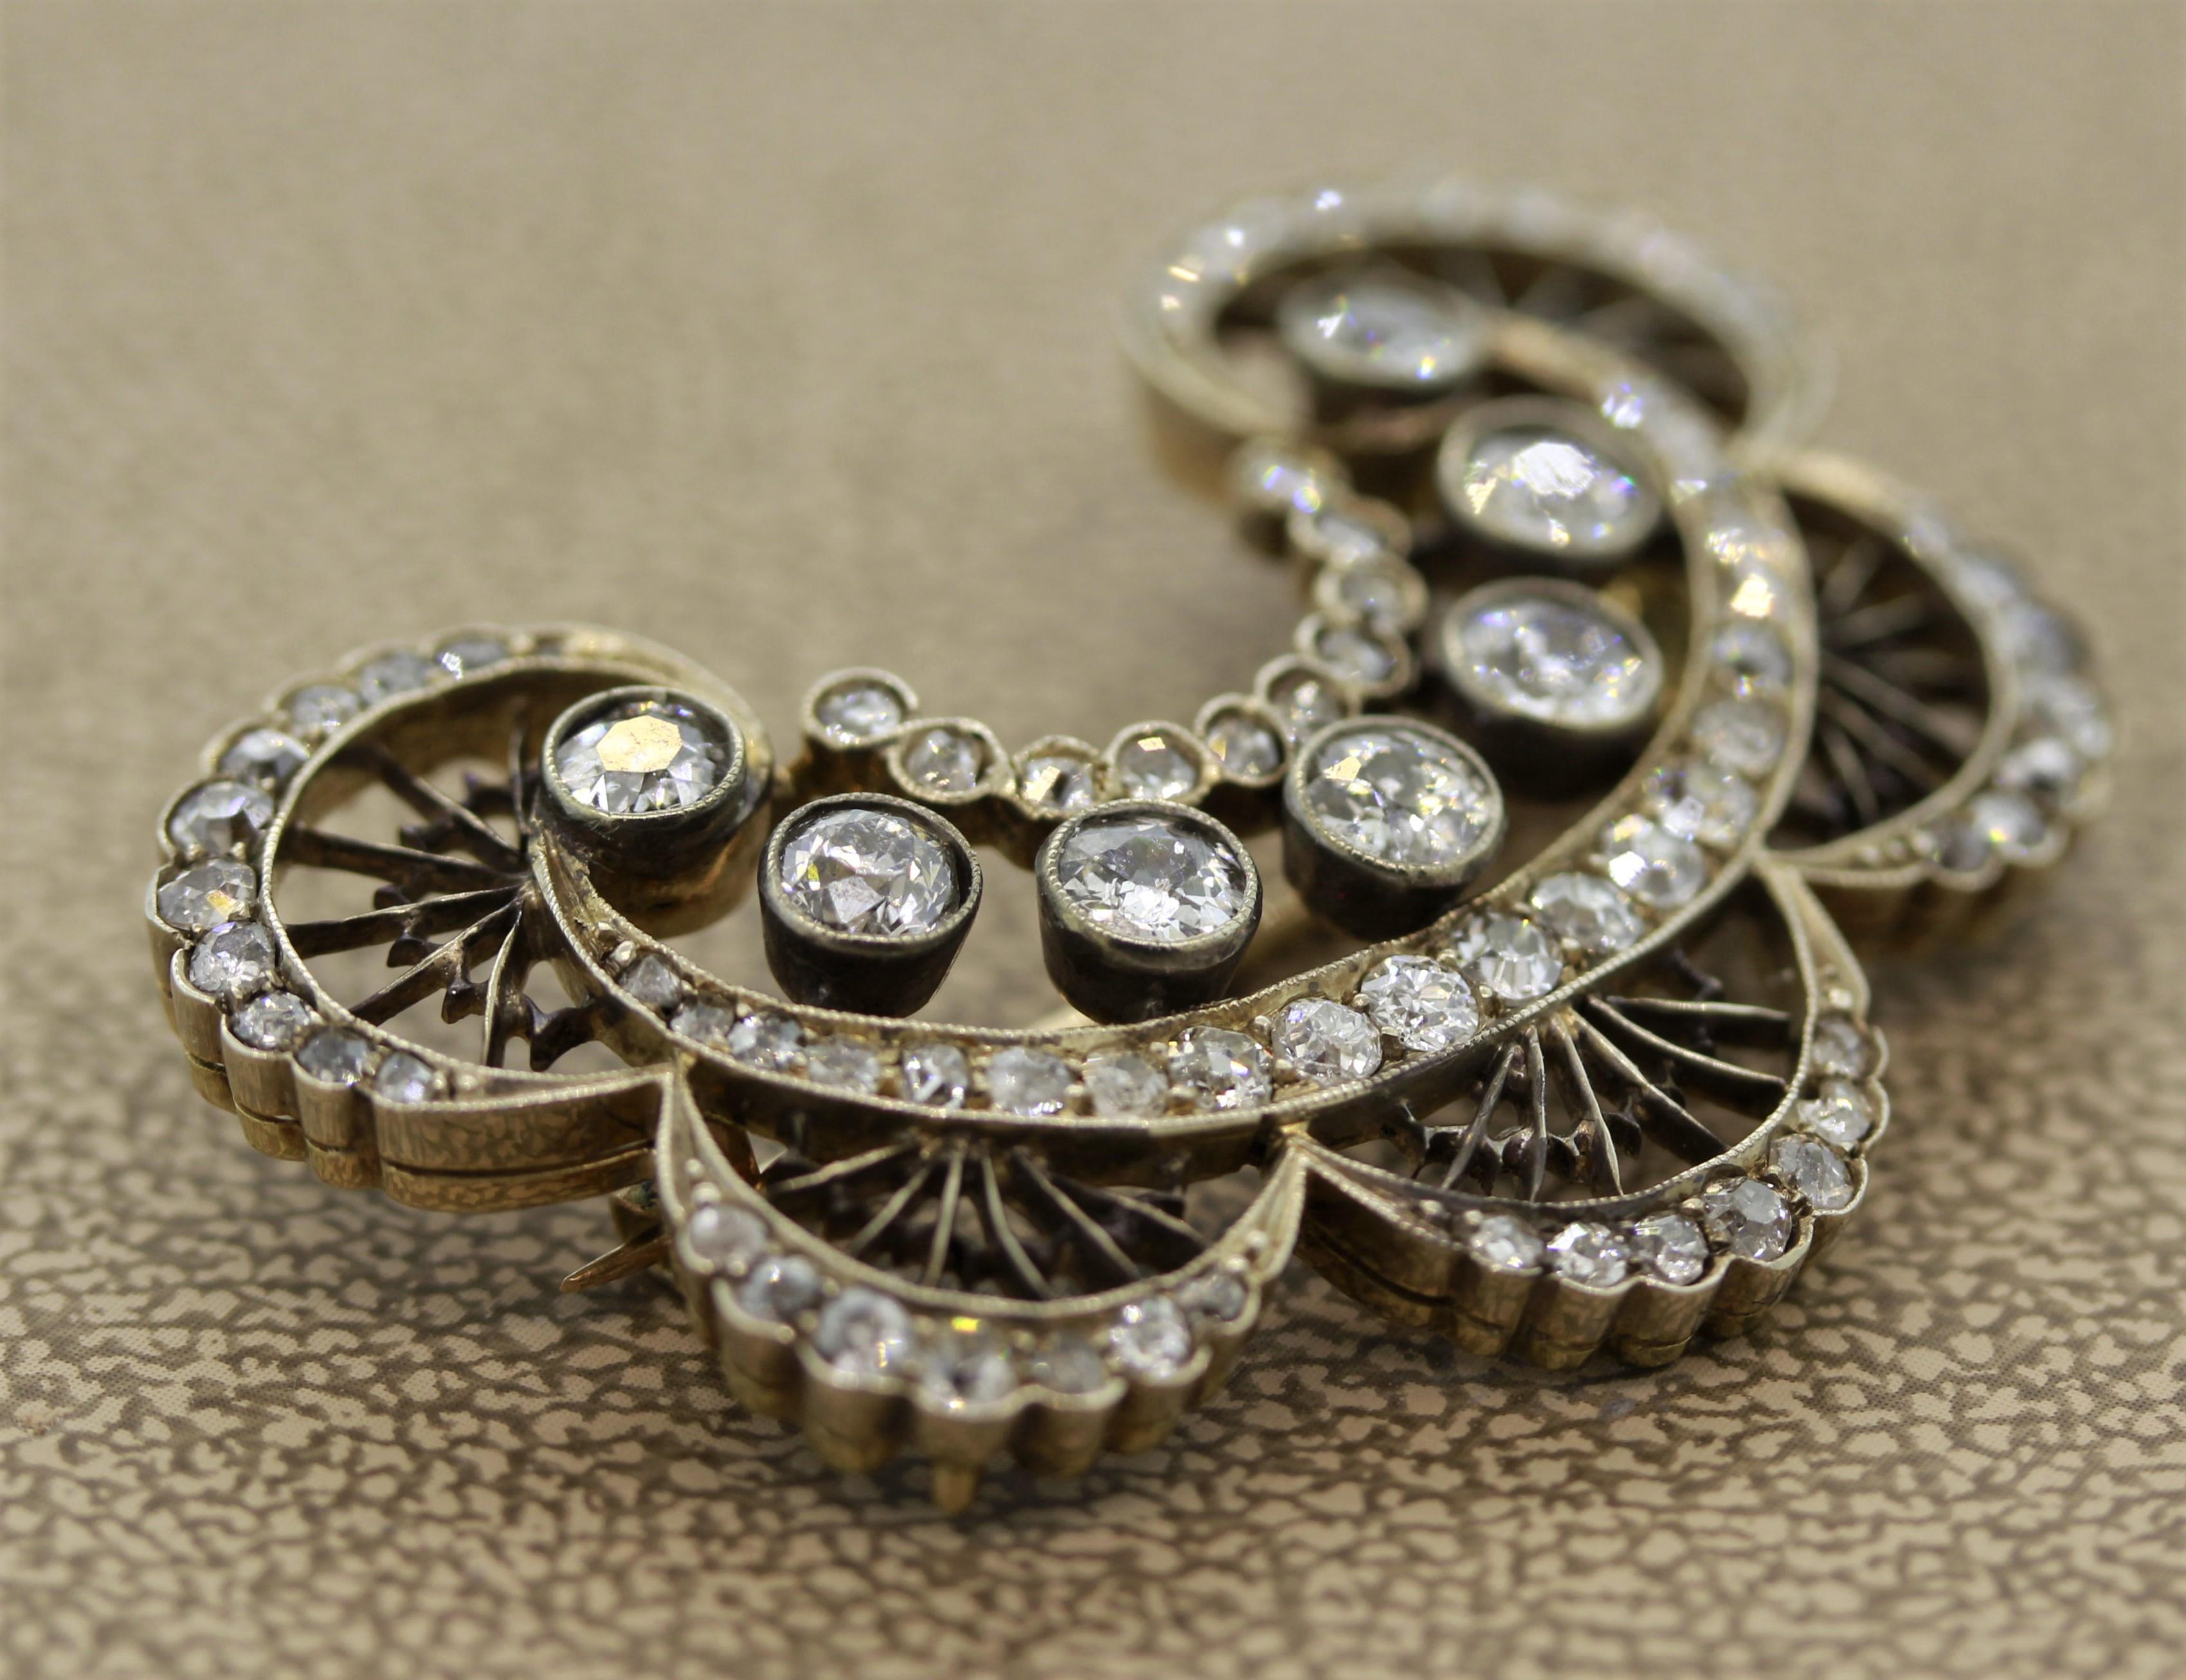 Late Victorian Antique Diamond Gold Silver-Topped Brooch